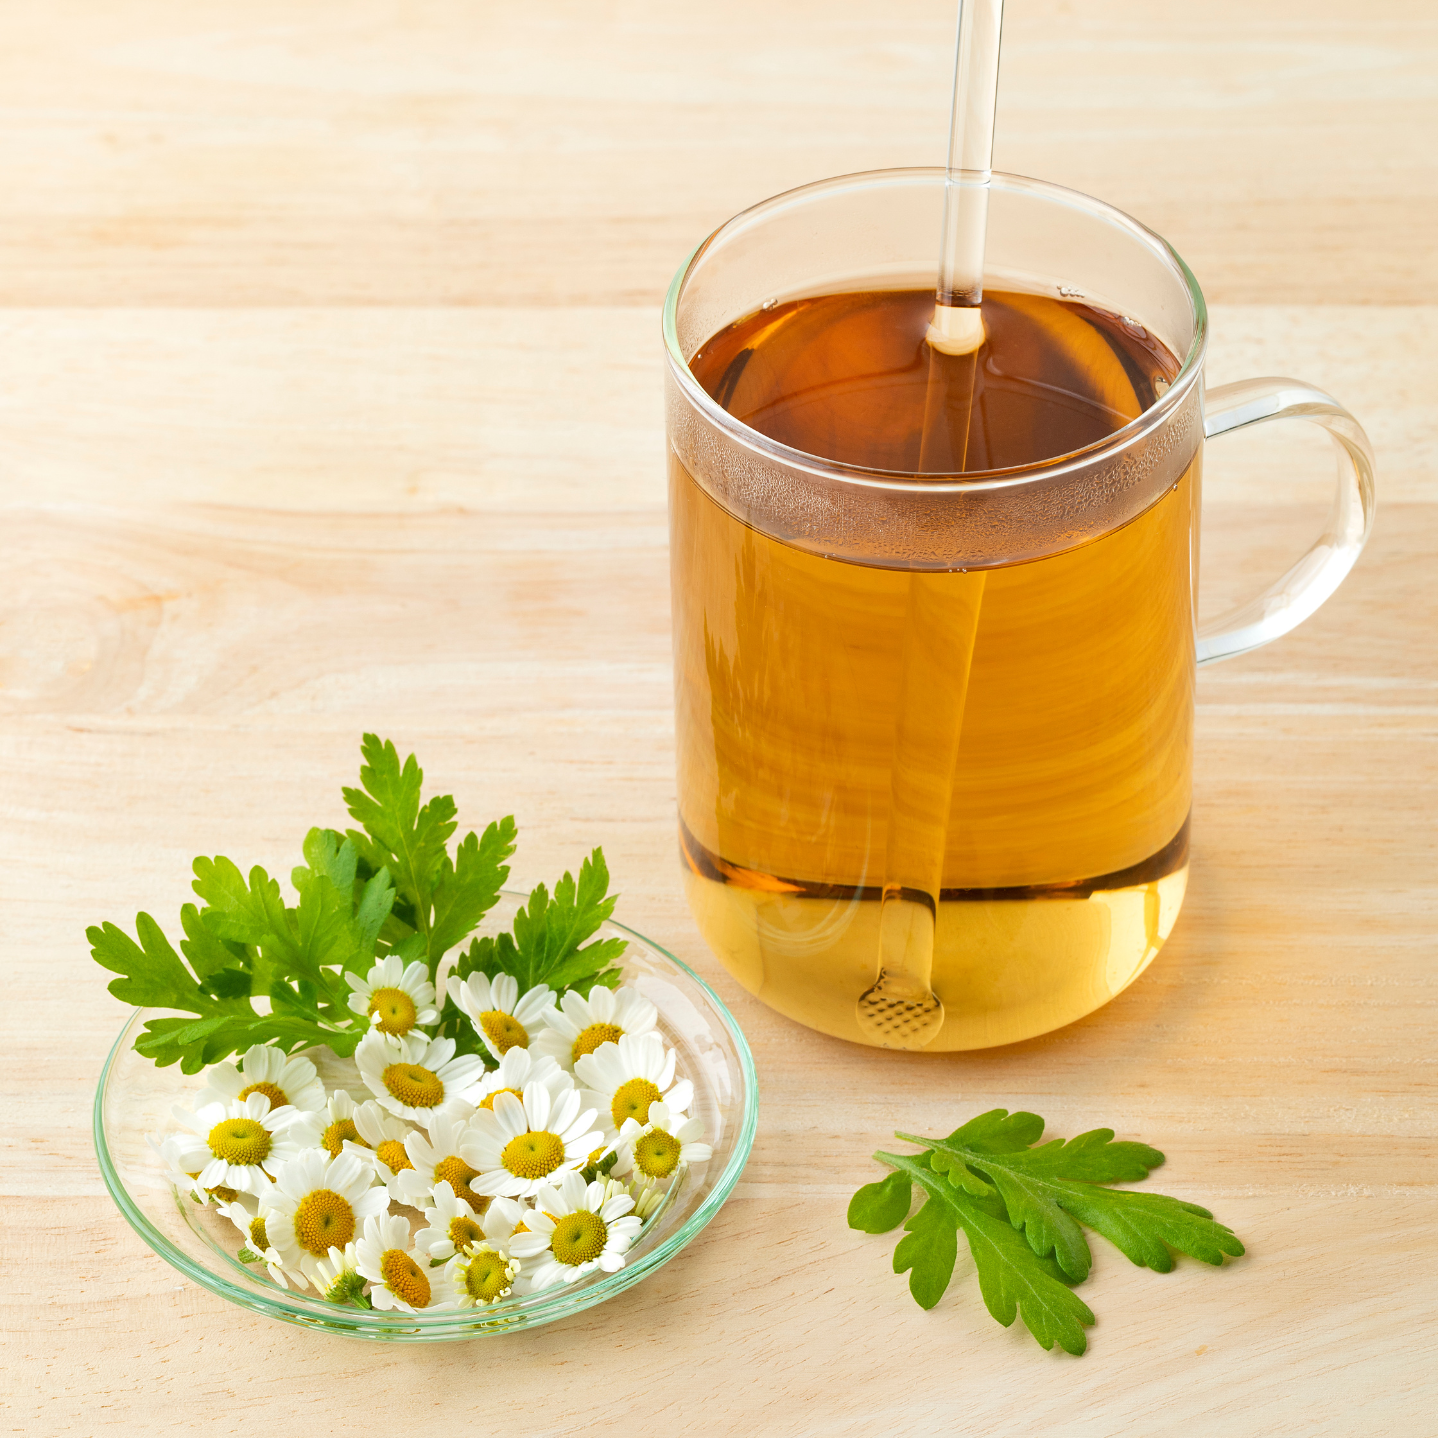 Witchy Pooh's Feverfew Herb For Protection Rituals from Disease and Evil